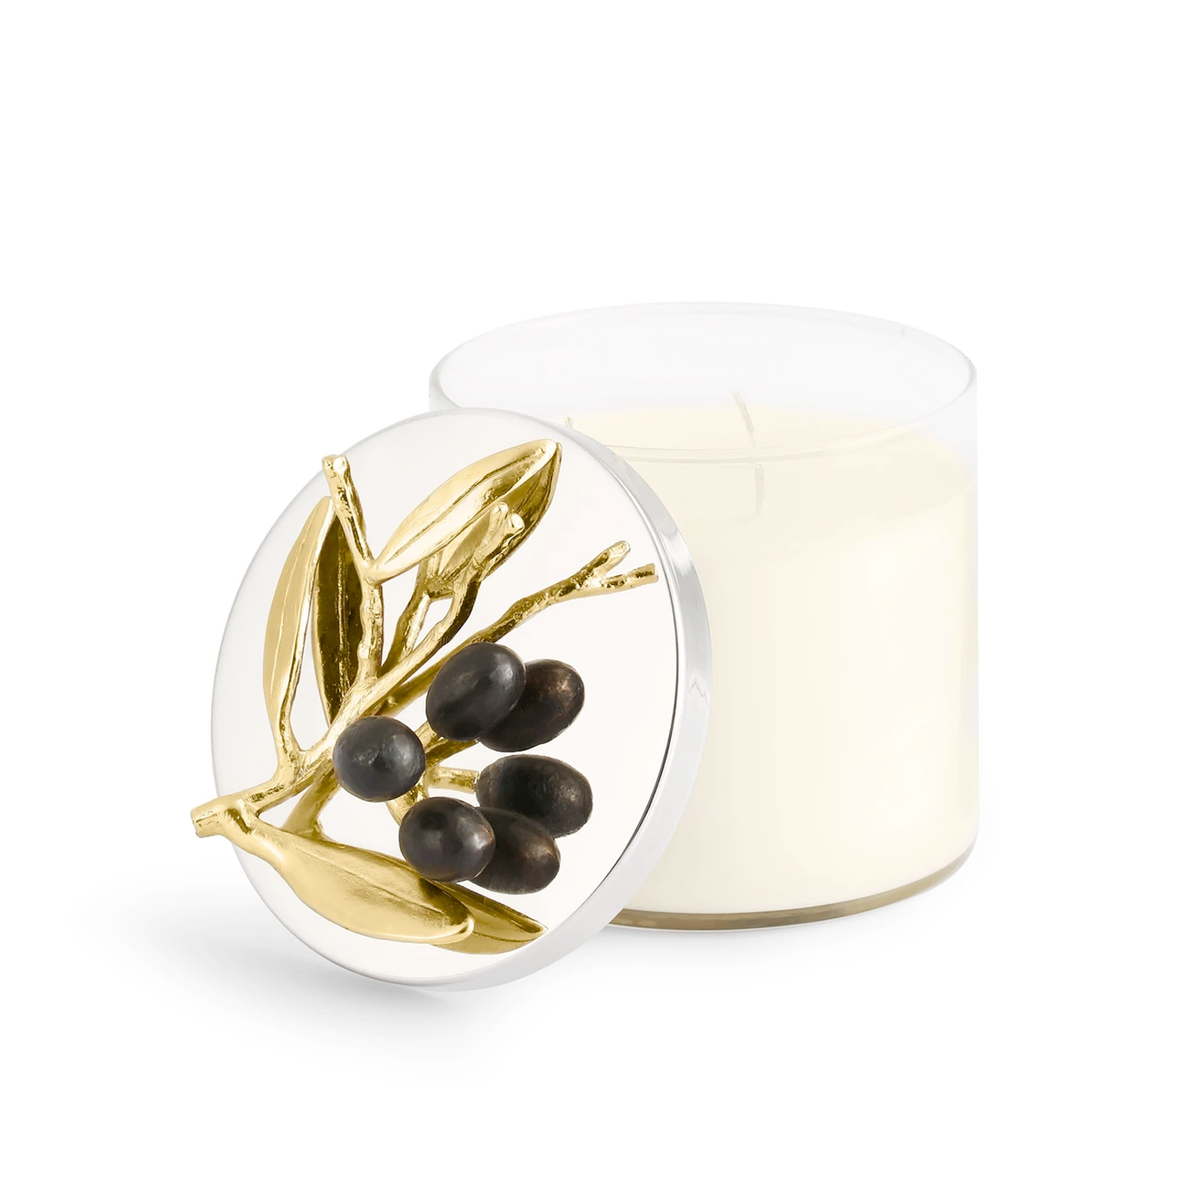 Olive Branch Candle, Michael Aram - RSVP Style